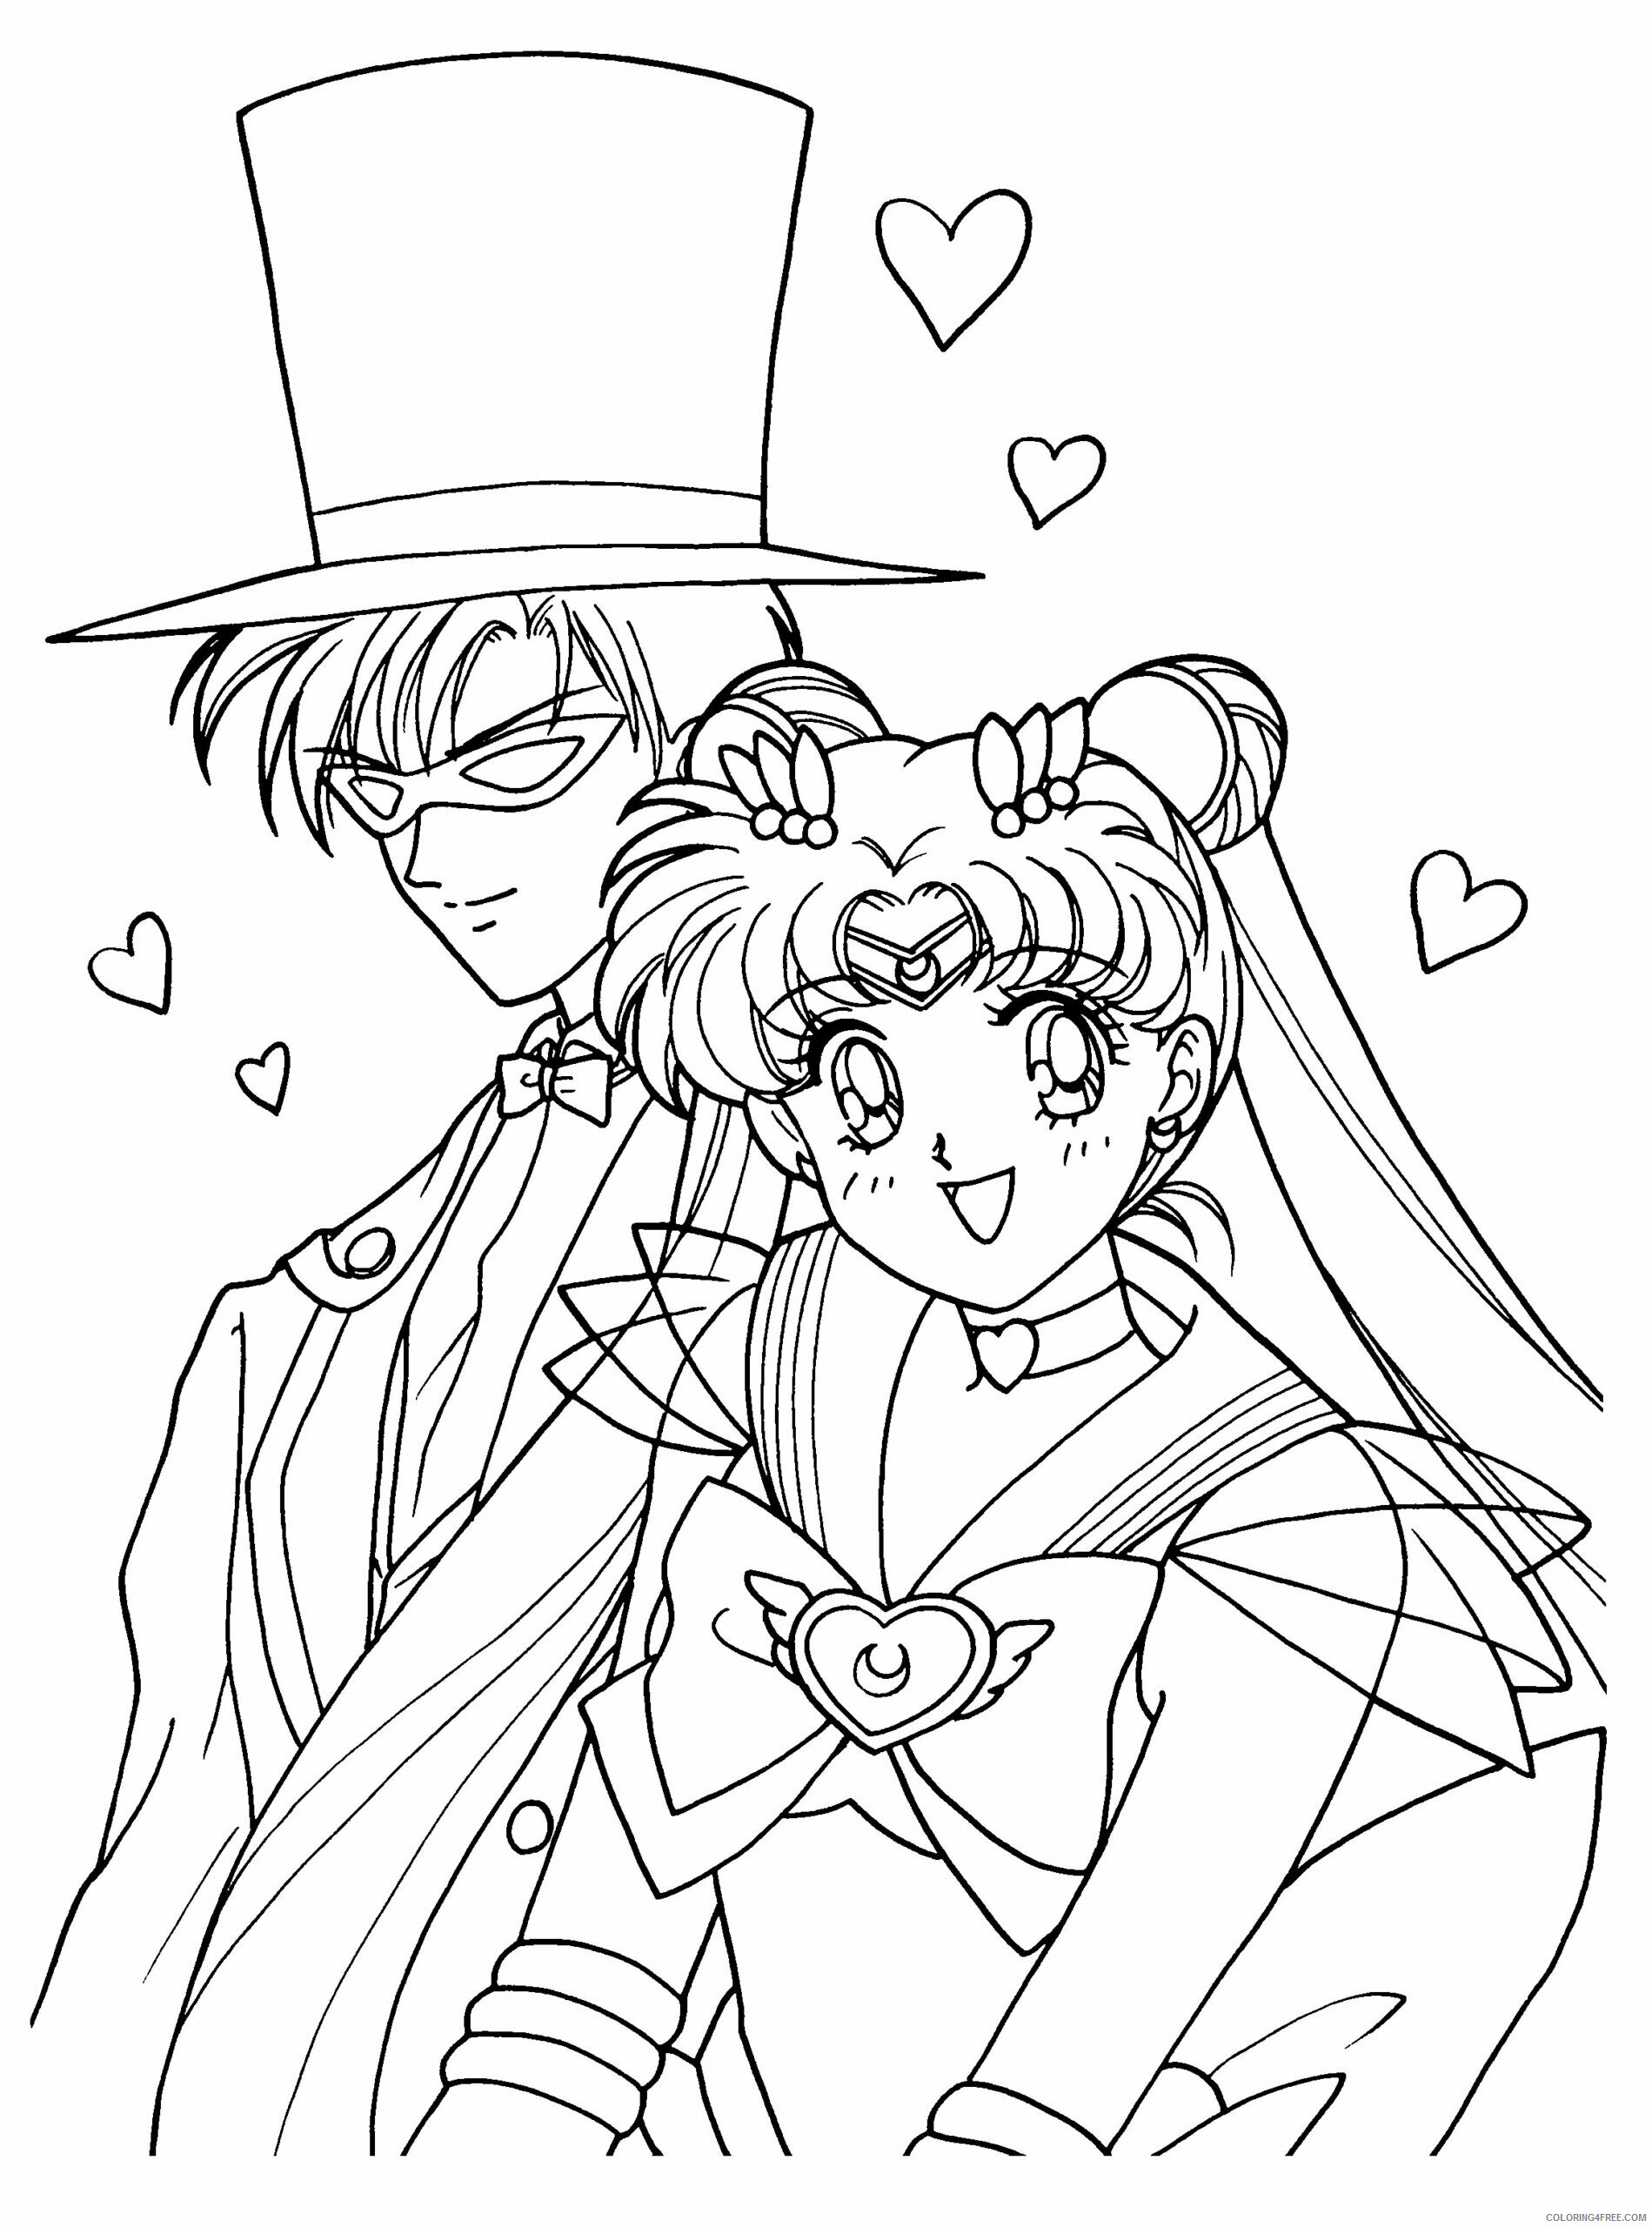 Sailor Moon Printable Coloring Pages Anime sailormoon tZfRh 2021 0996 Coloring4free